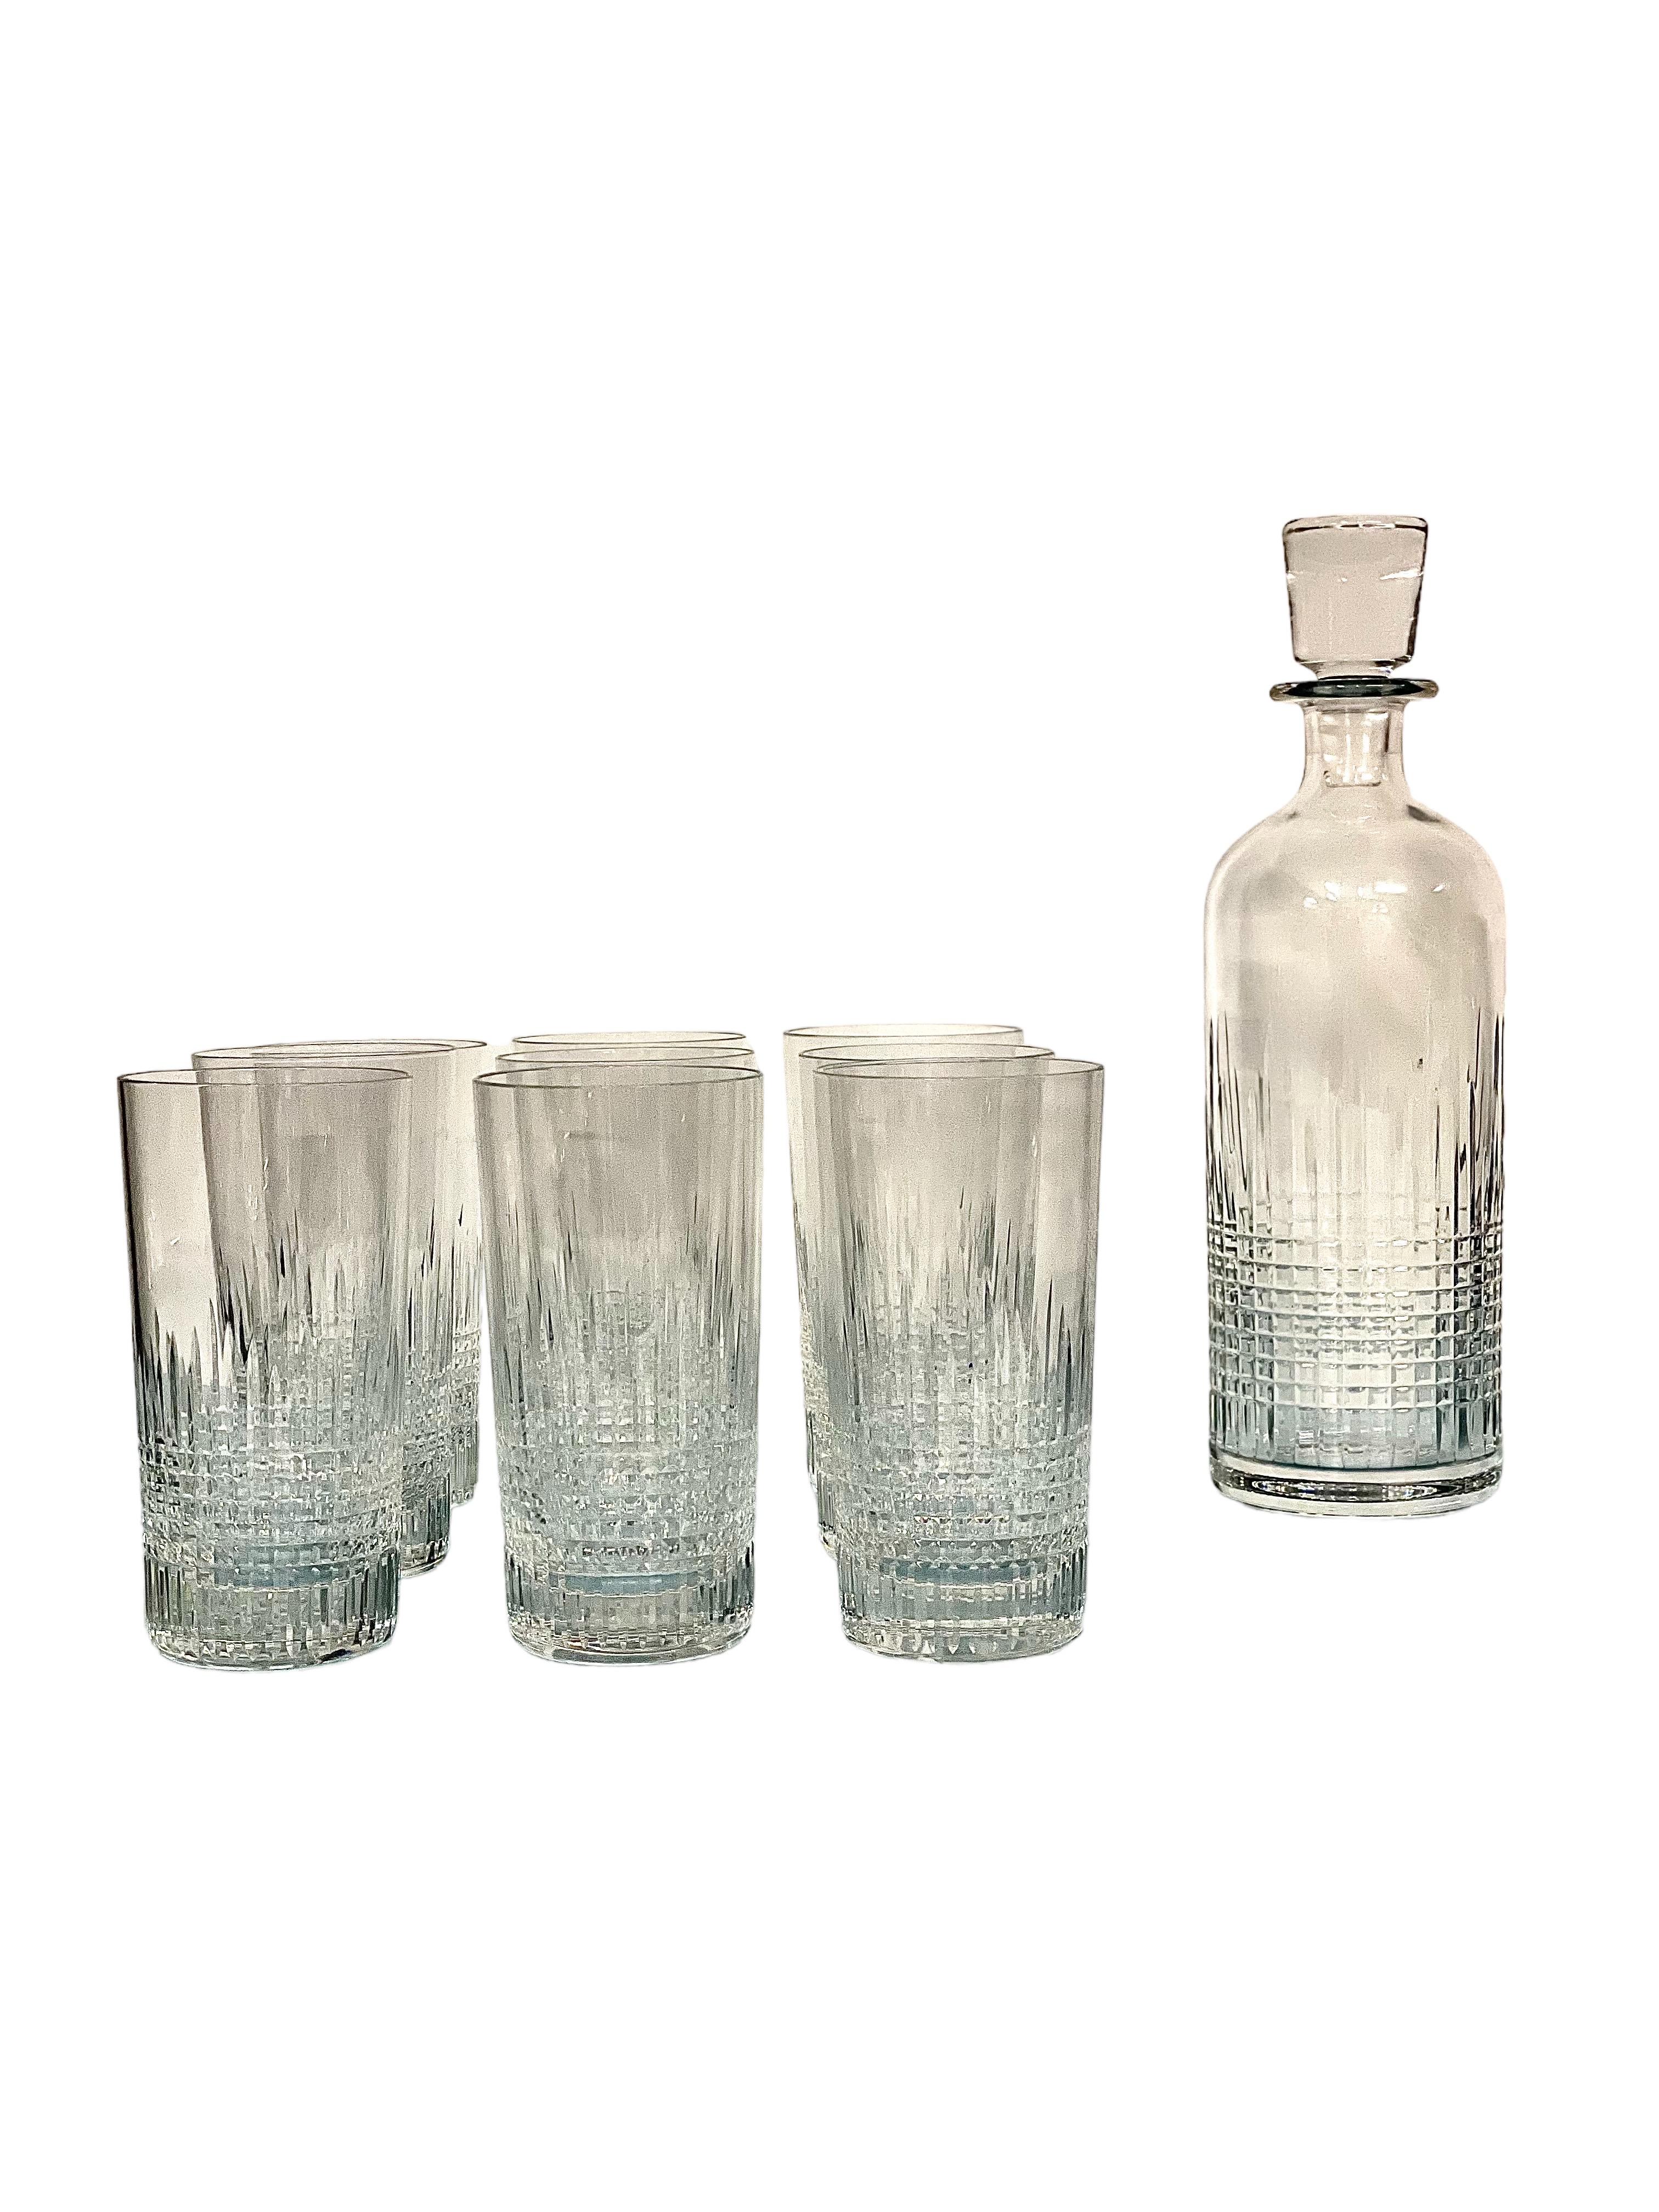 A very stylish set of nine Baccarat highball glasses, beautifully cut from fine clear crystal in the 'Nancy' pattern, which was first produced in 1909. Each of these glasses feels ultra-luxurious to hold, with the textural feeling of the diamond-cut